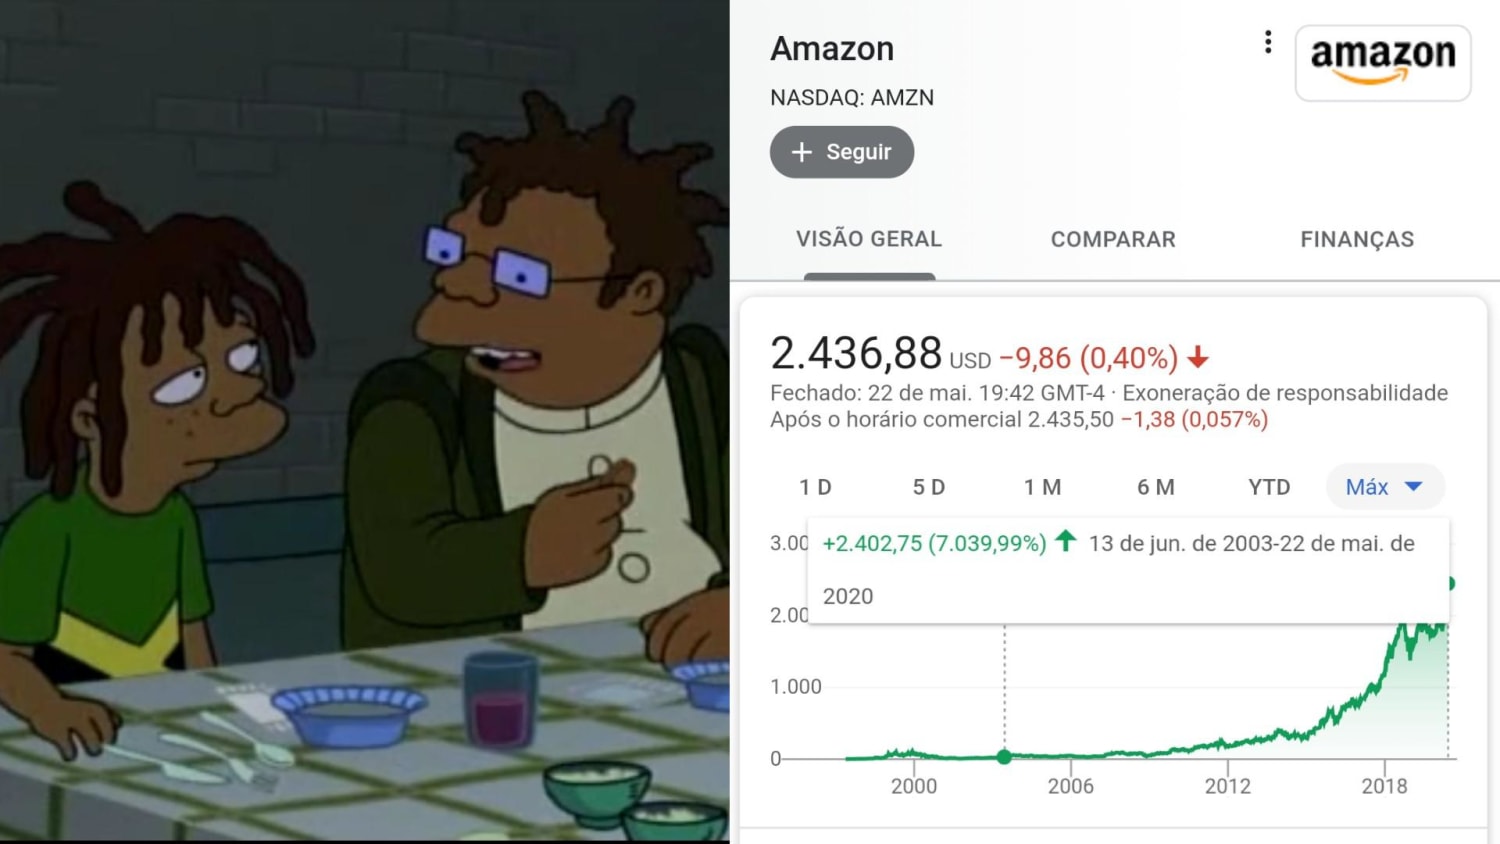 If Hermes's son had invested his penny on AMZN back when the episode was aired, he would have now about 20 cents, or ~11000 USD if he had bought the 5 shares at real price. Somebody get me a microwave and a supernova I need to go back.